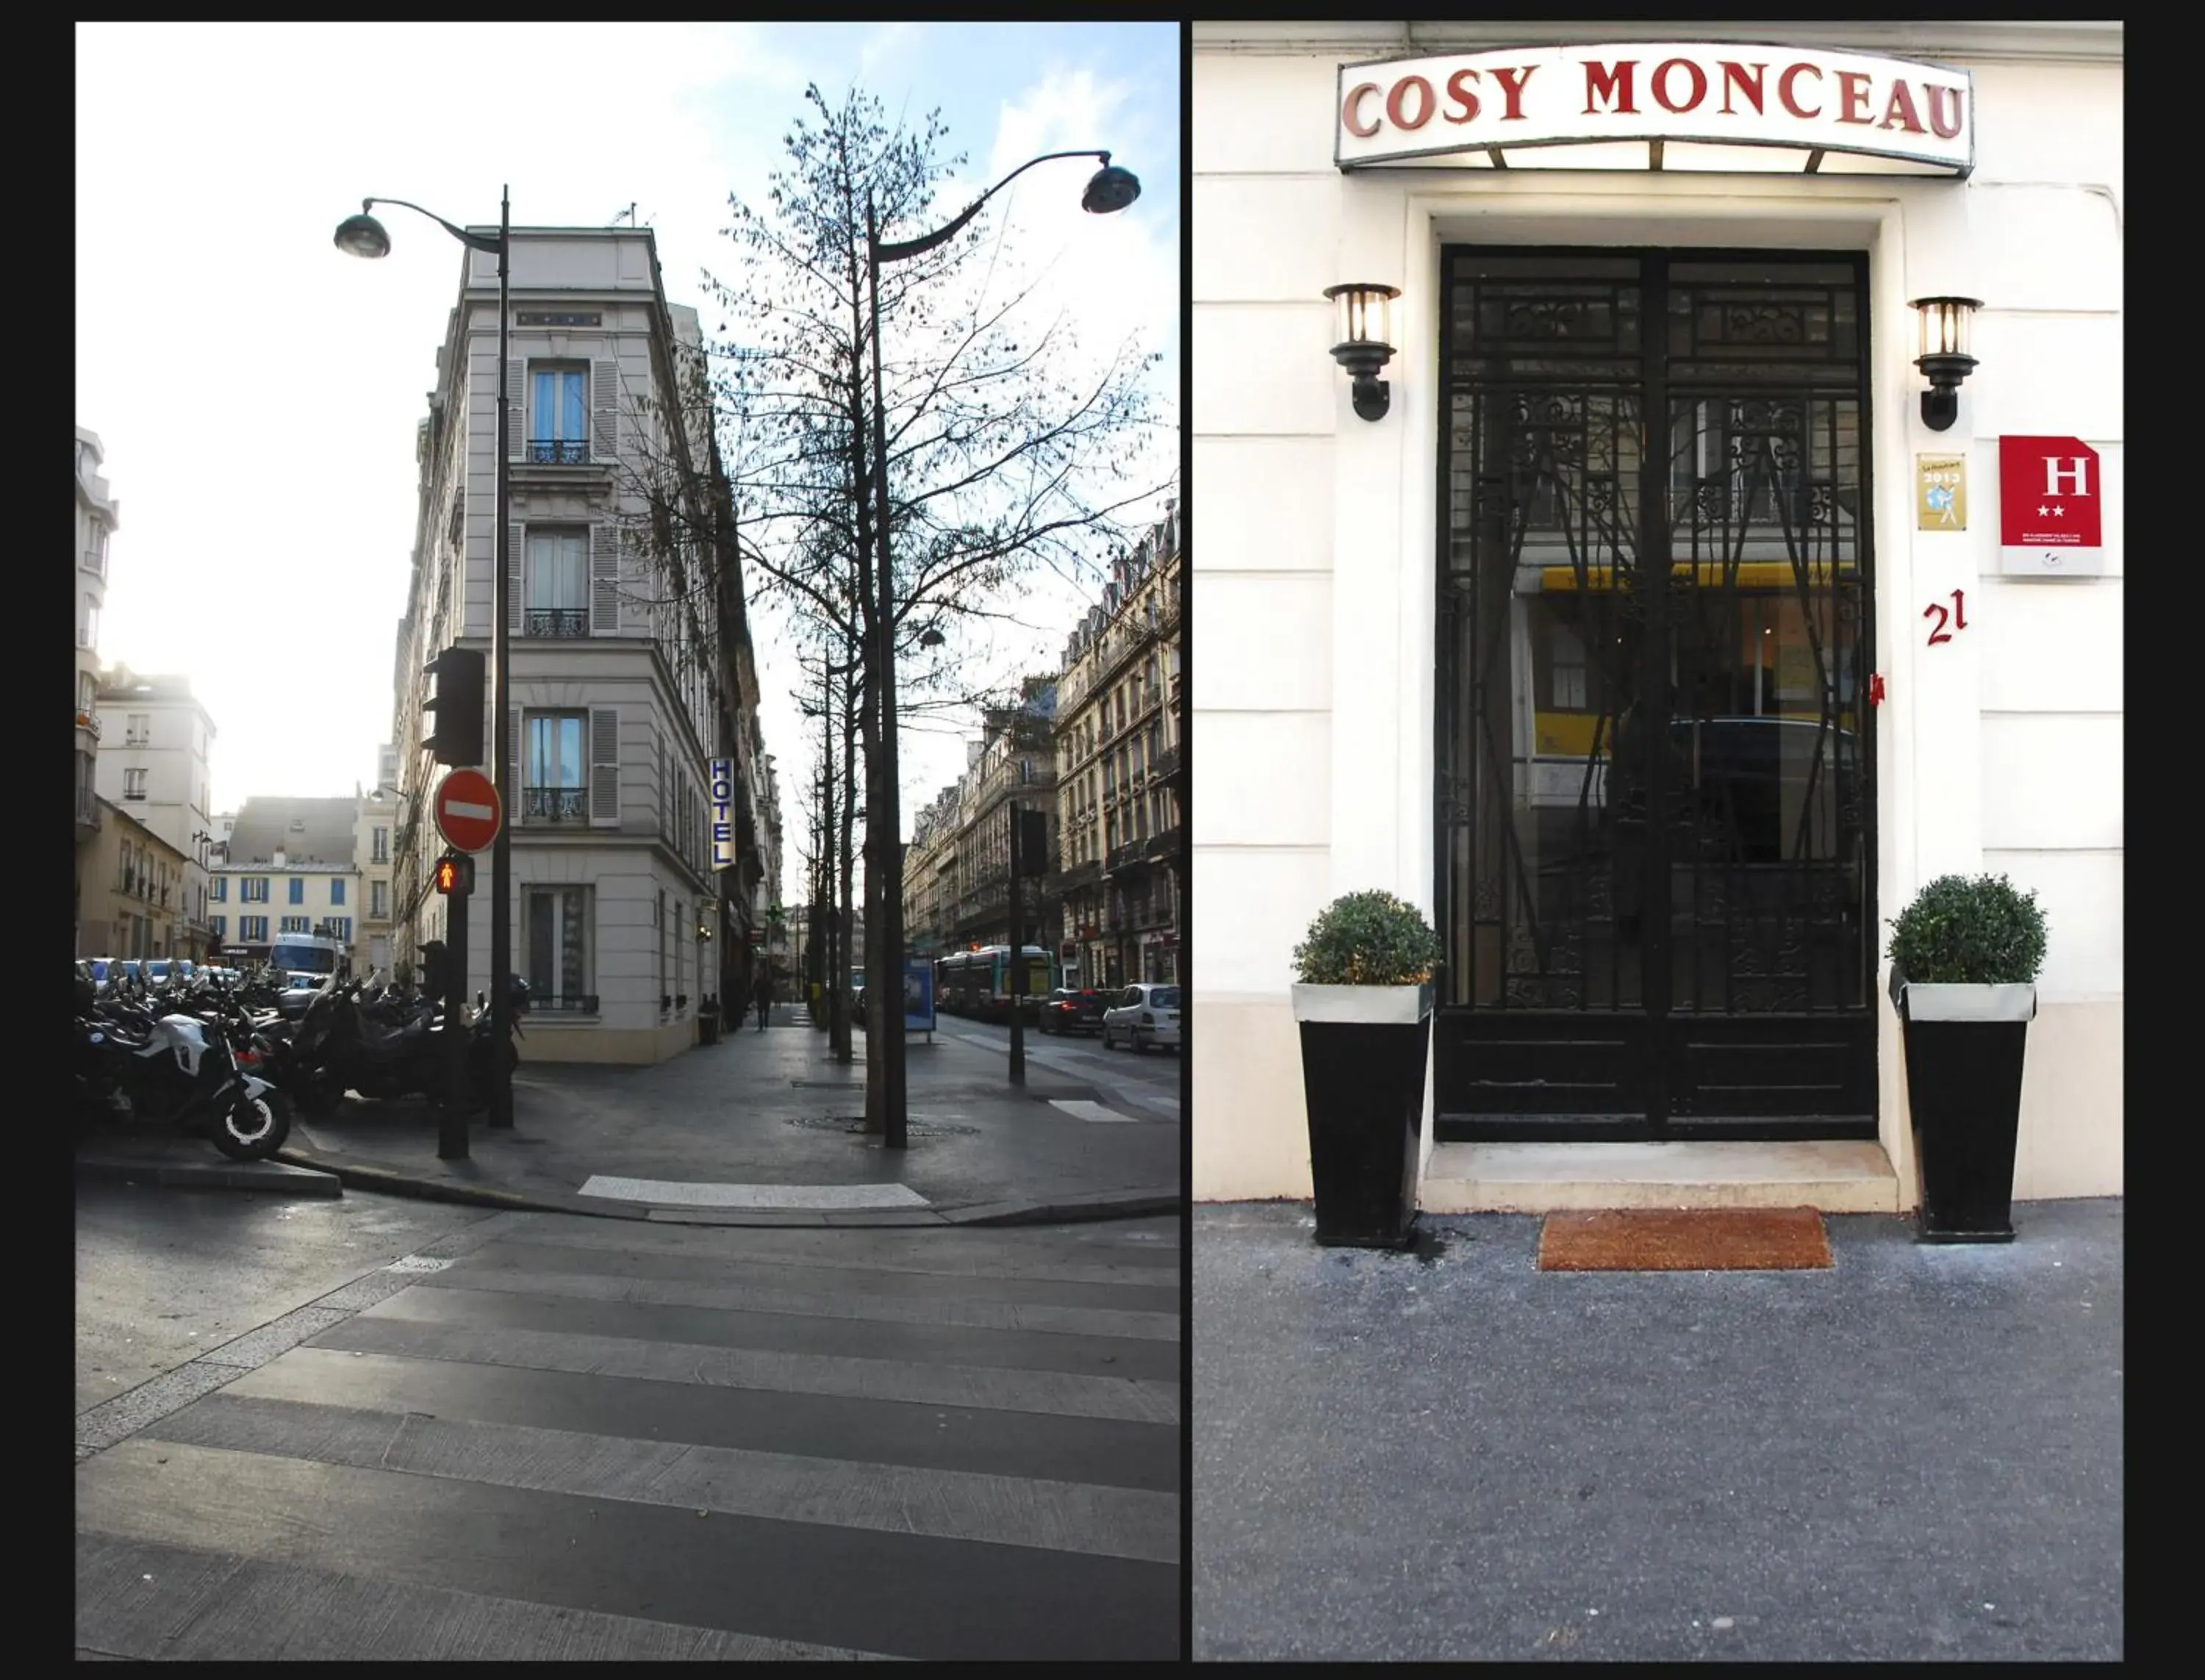 Property building in Cosy Monceau